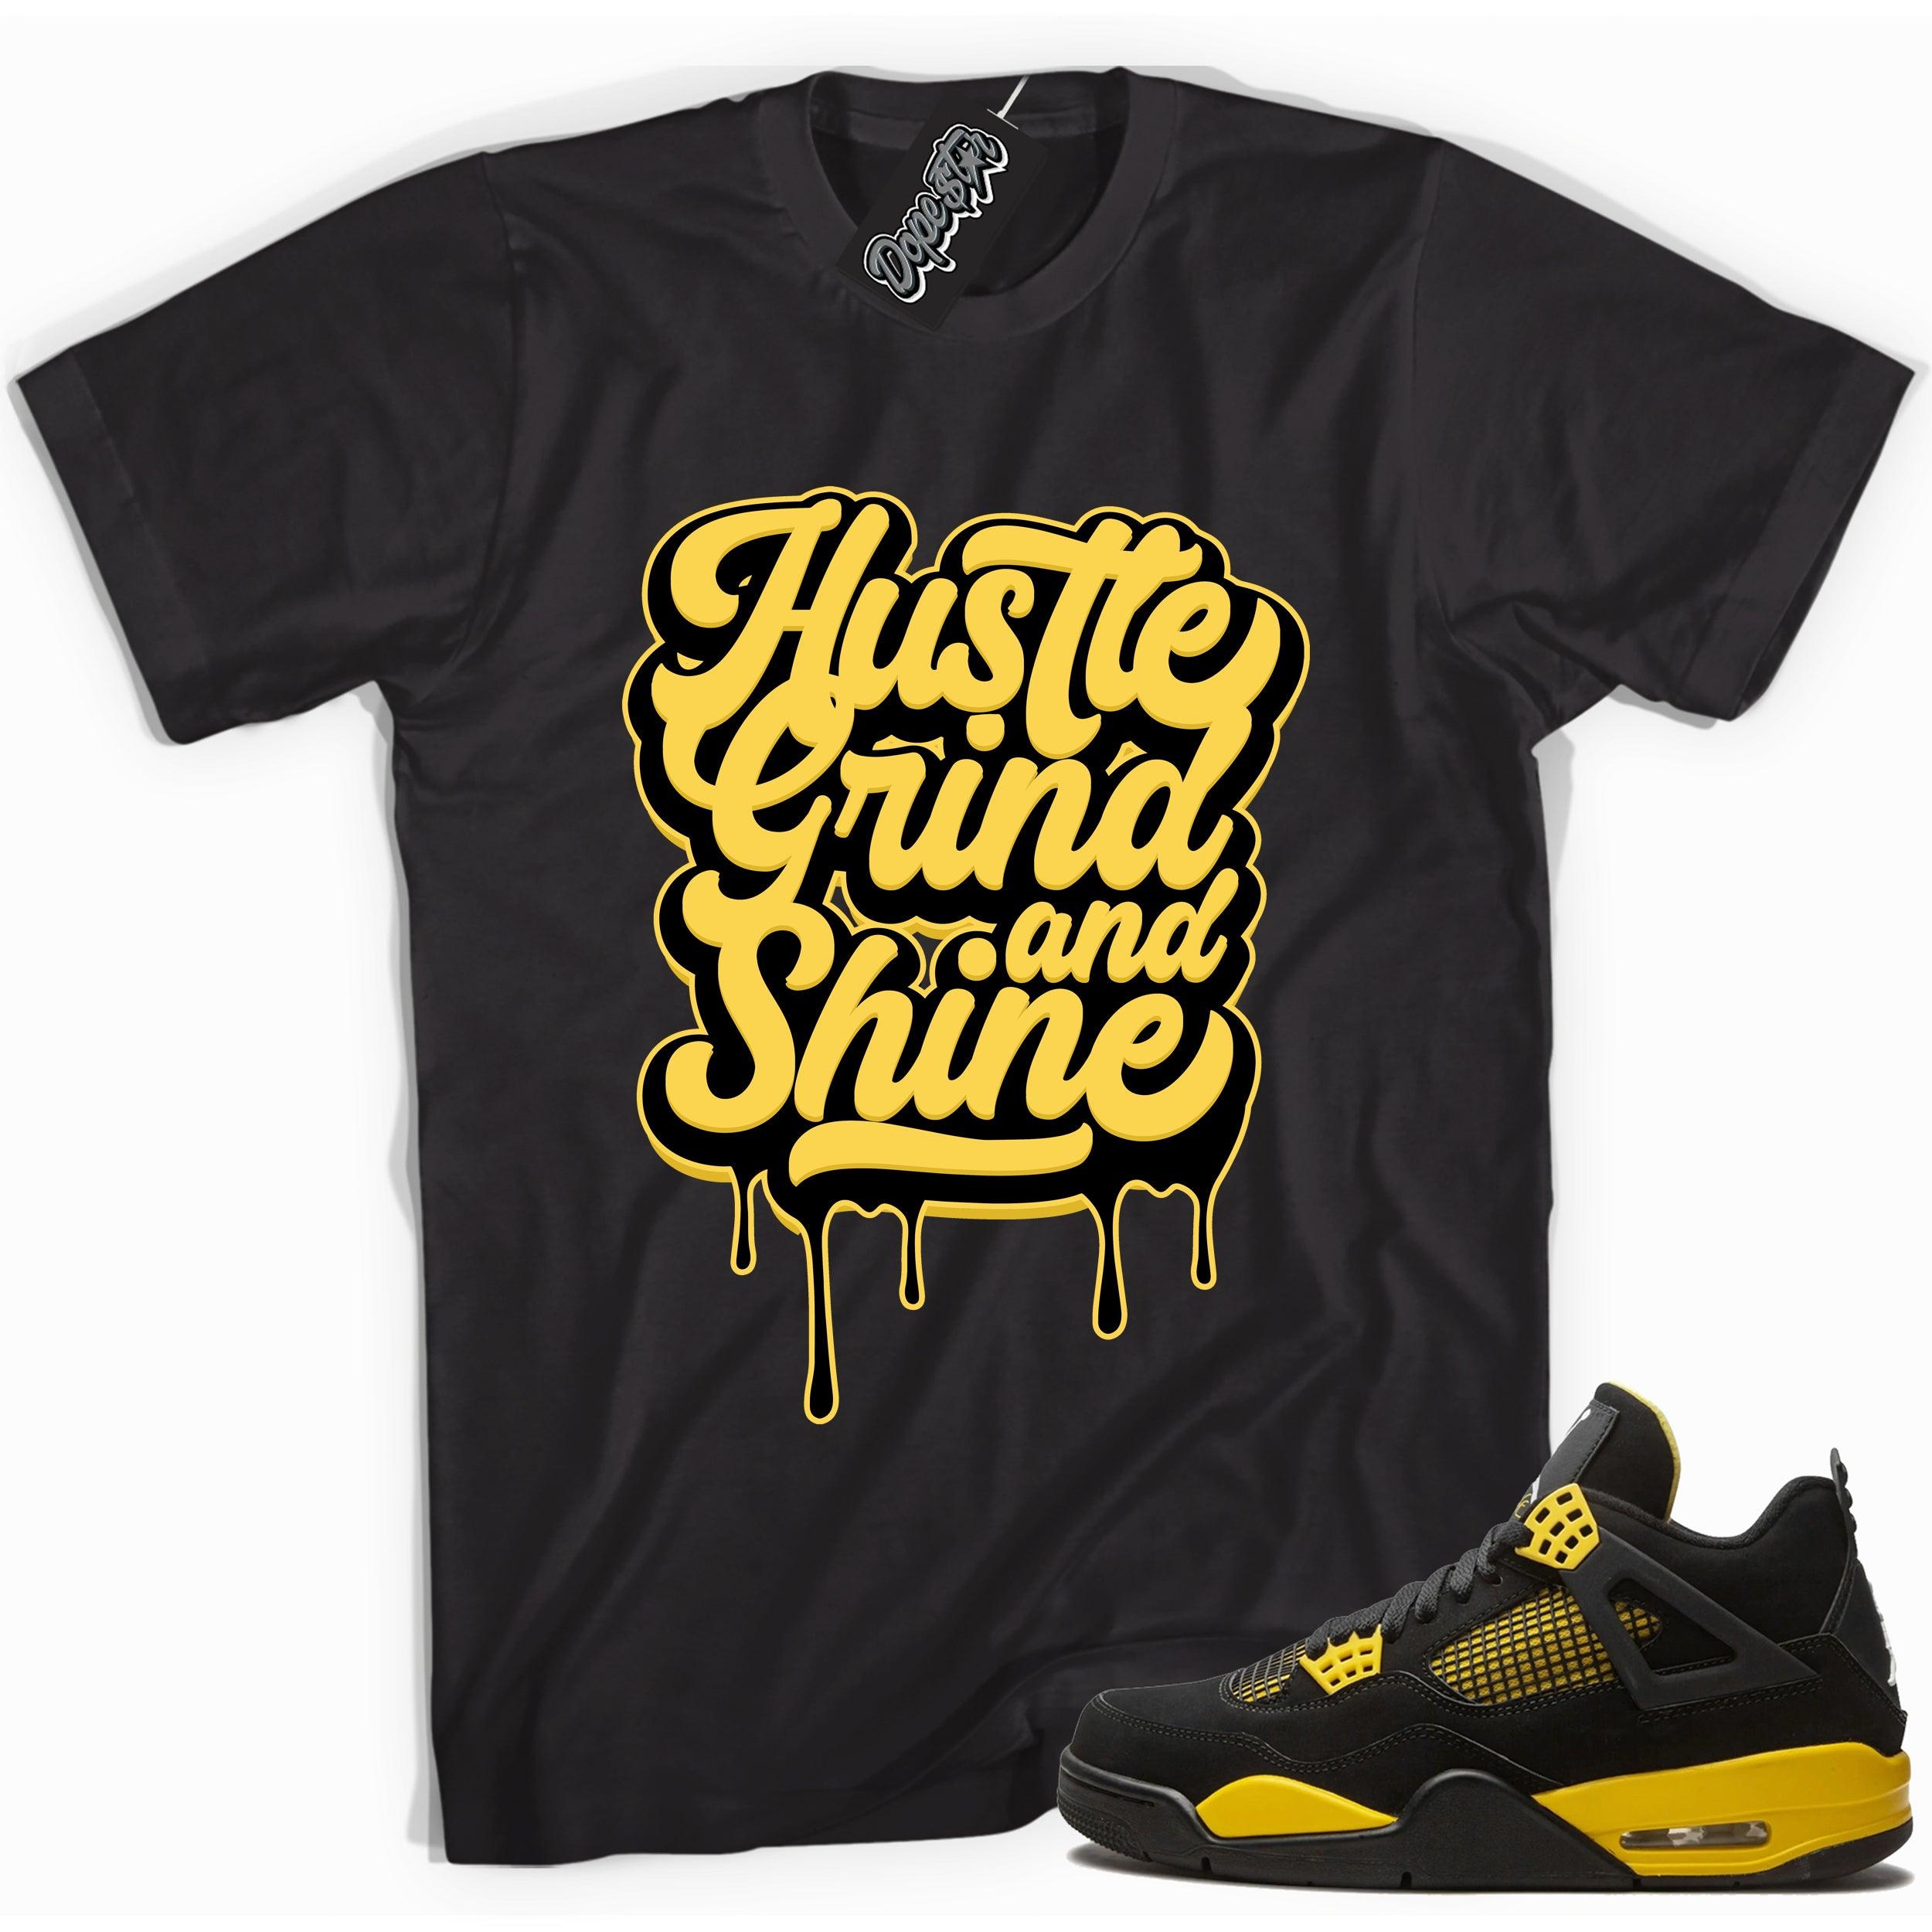 Cool black graphic tee with 'hustle grind & shine' print, that perfectly matches  Air Jordan 4 Thunder sneakers